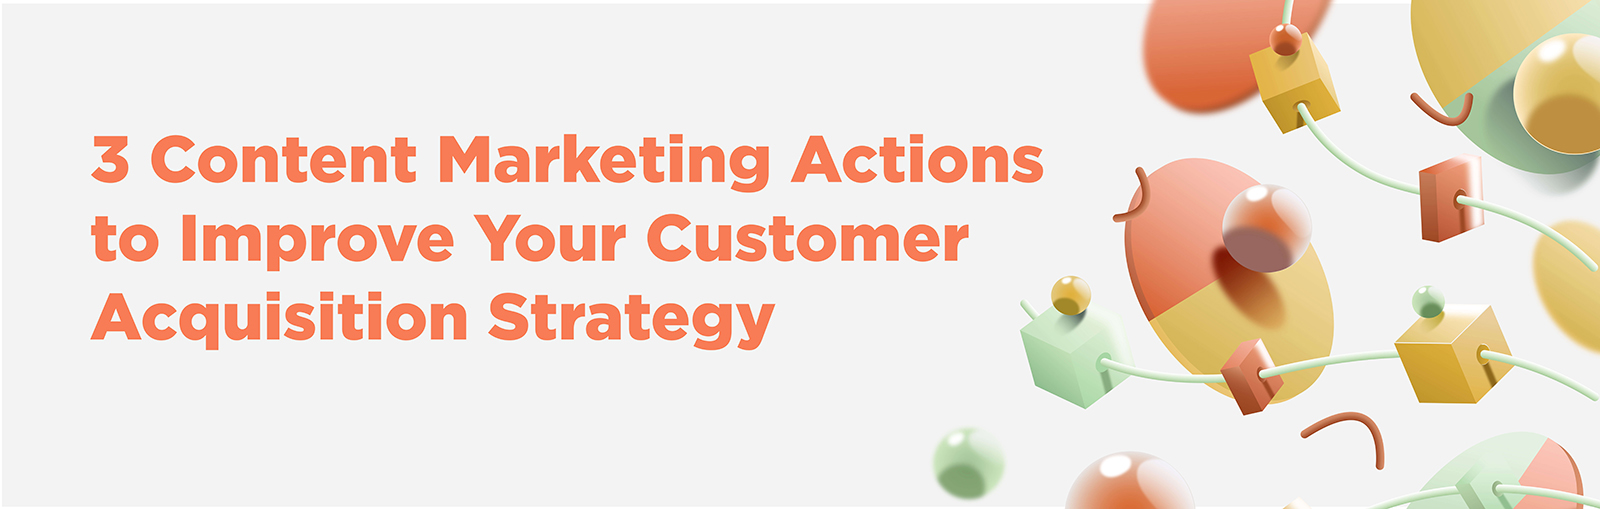 3 Content Marketing Actions to Improve Your Customer Acquisition Strategy